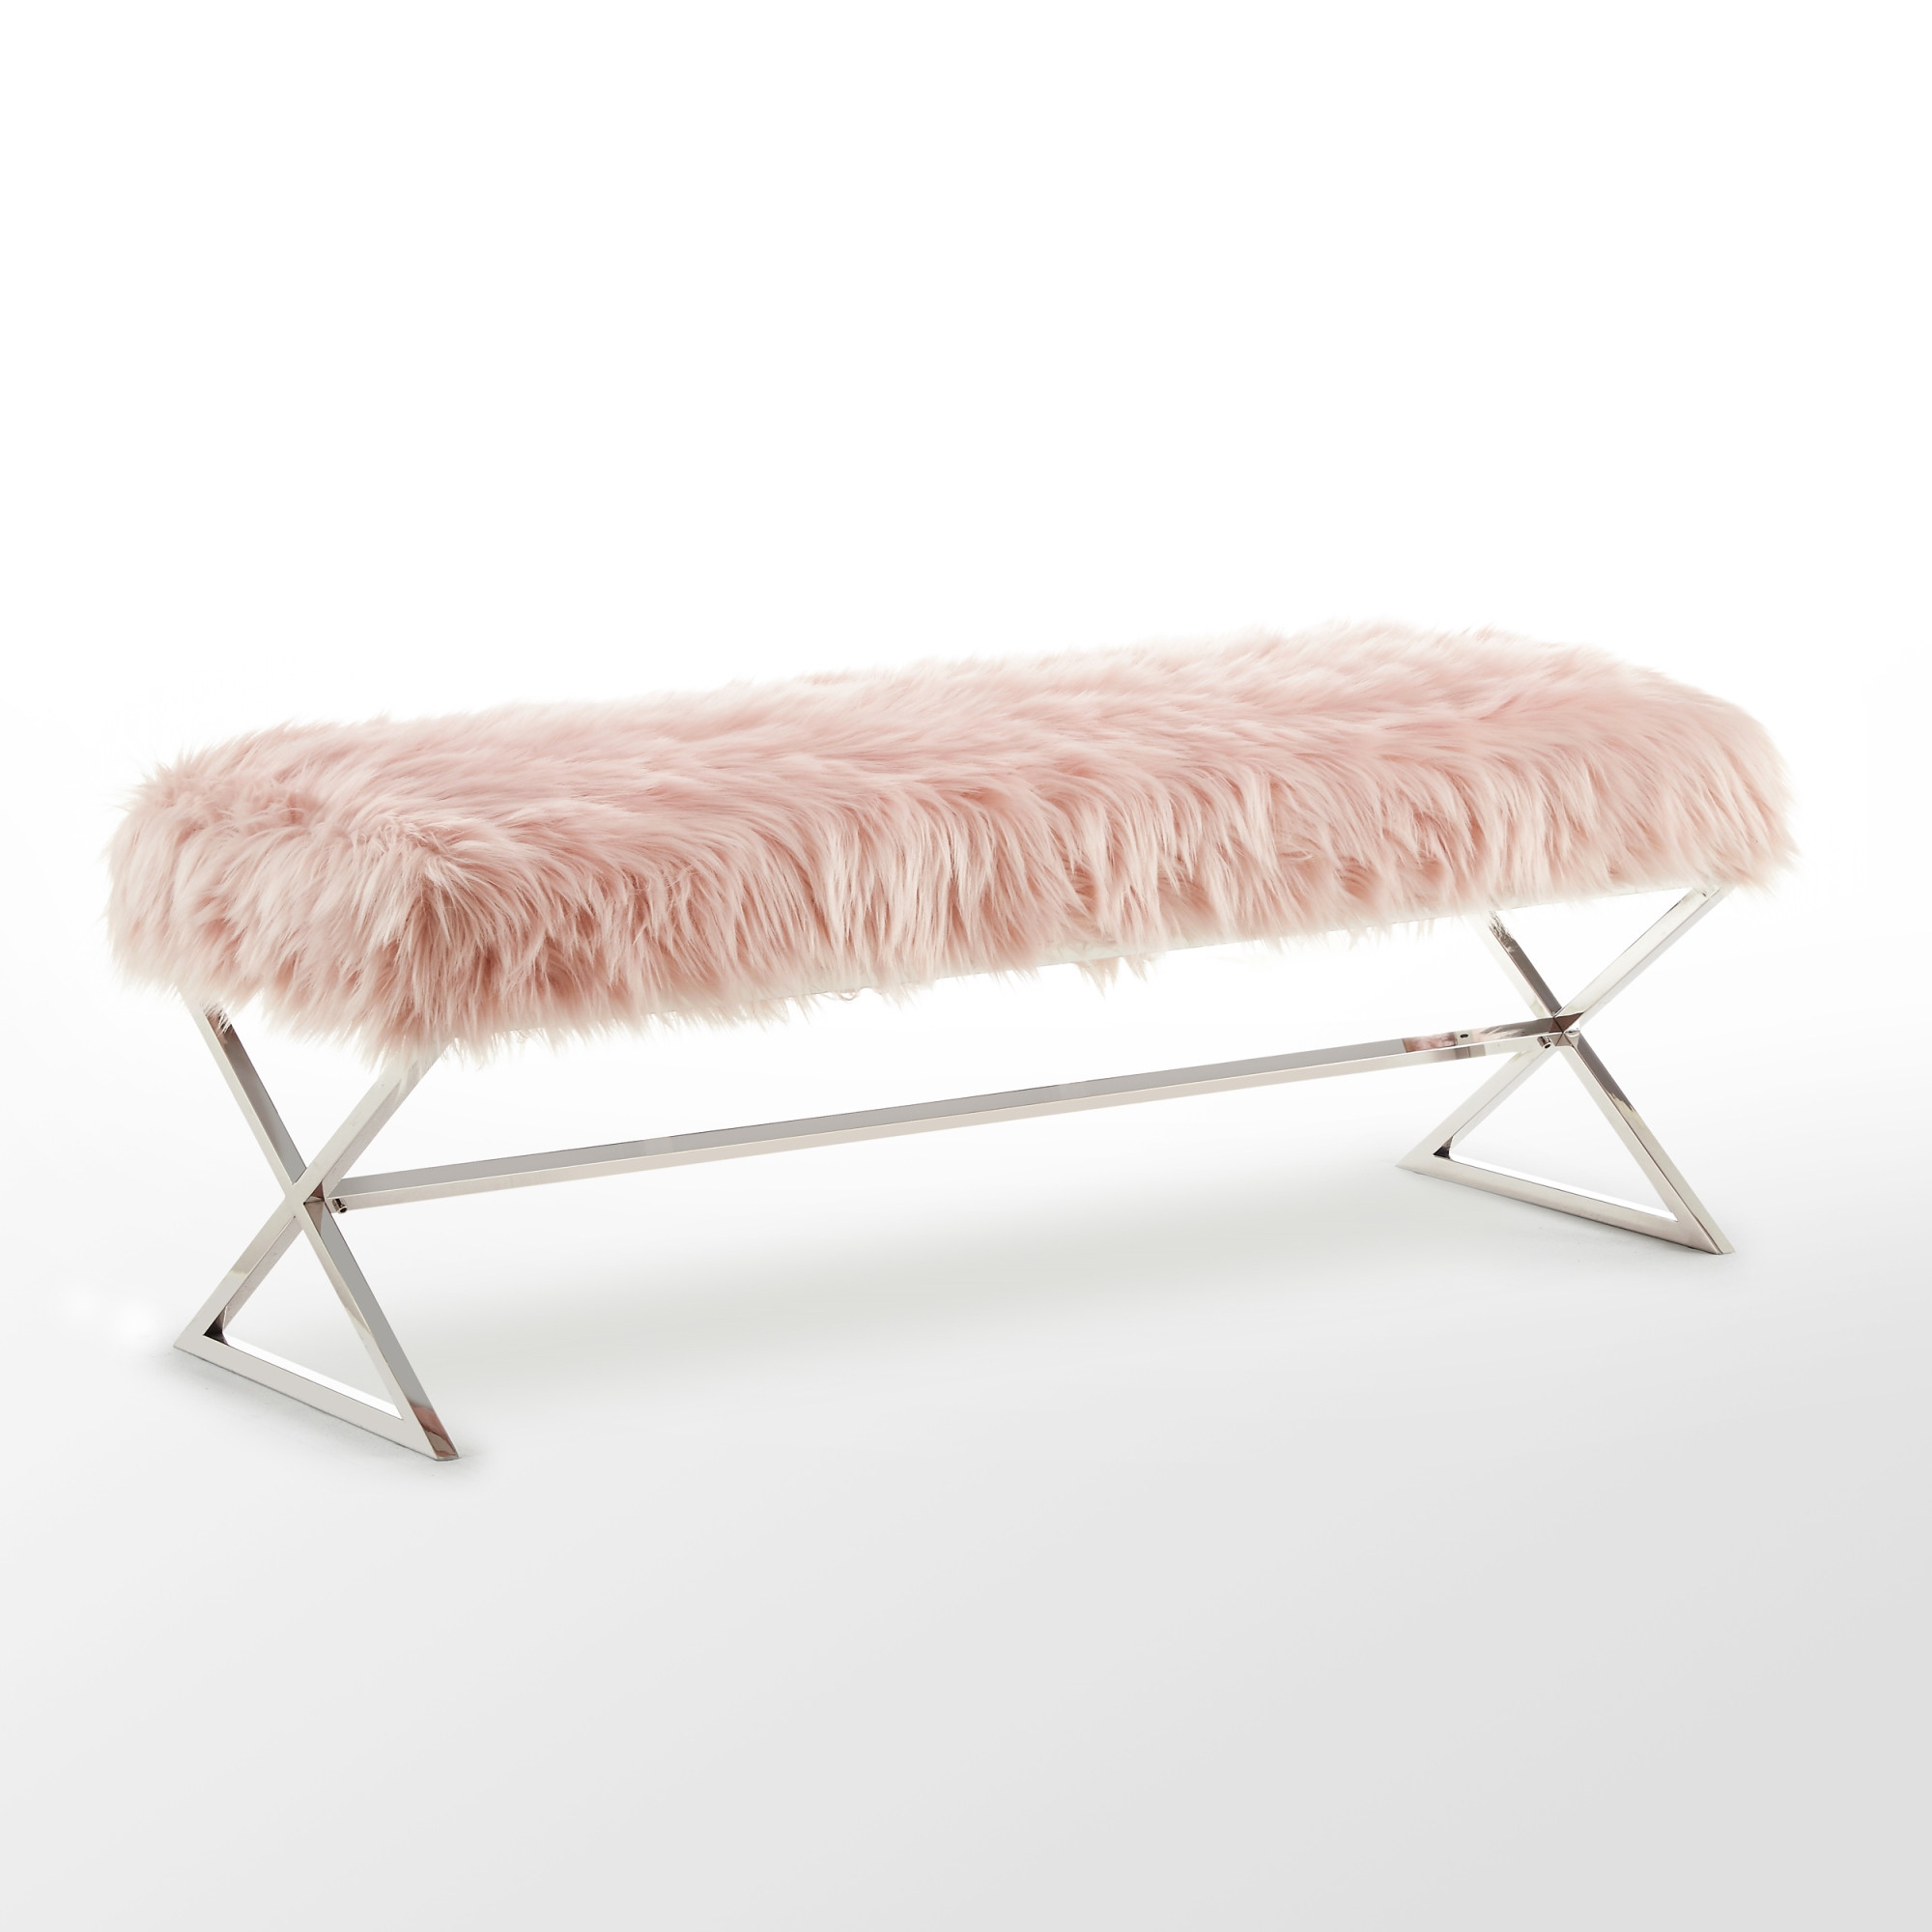 48" Rose And Silver Upholstered Faux Fur Bench-490874-1